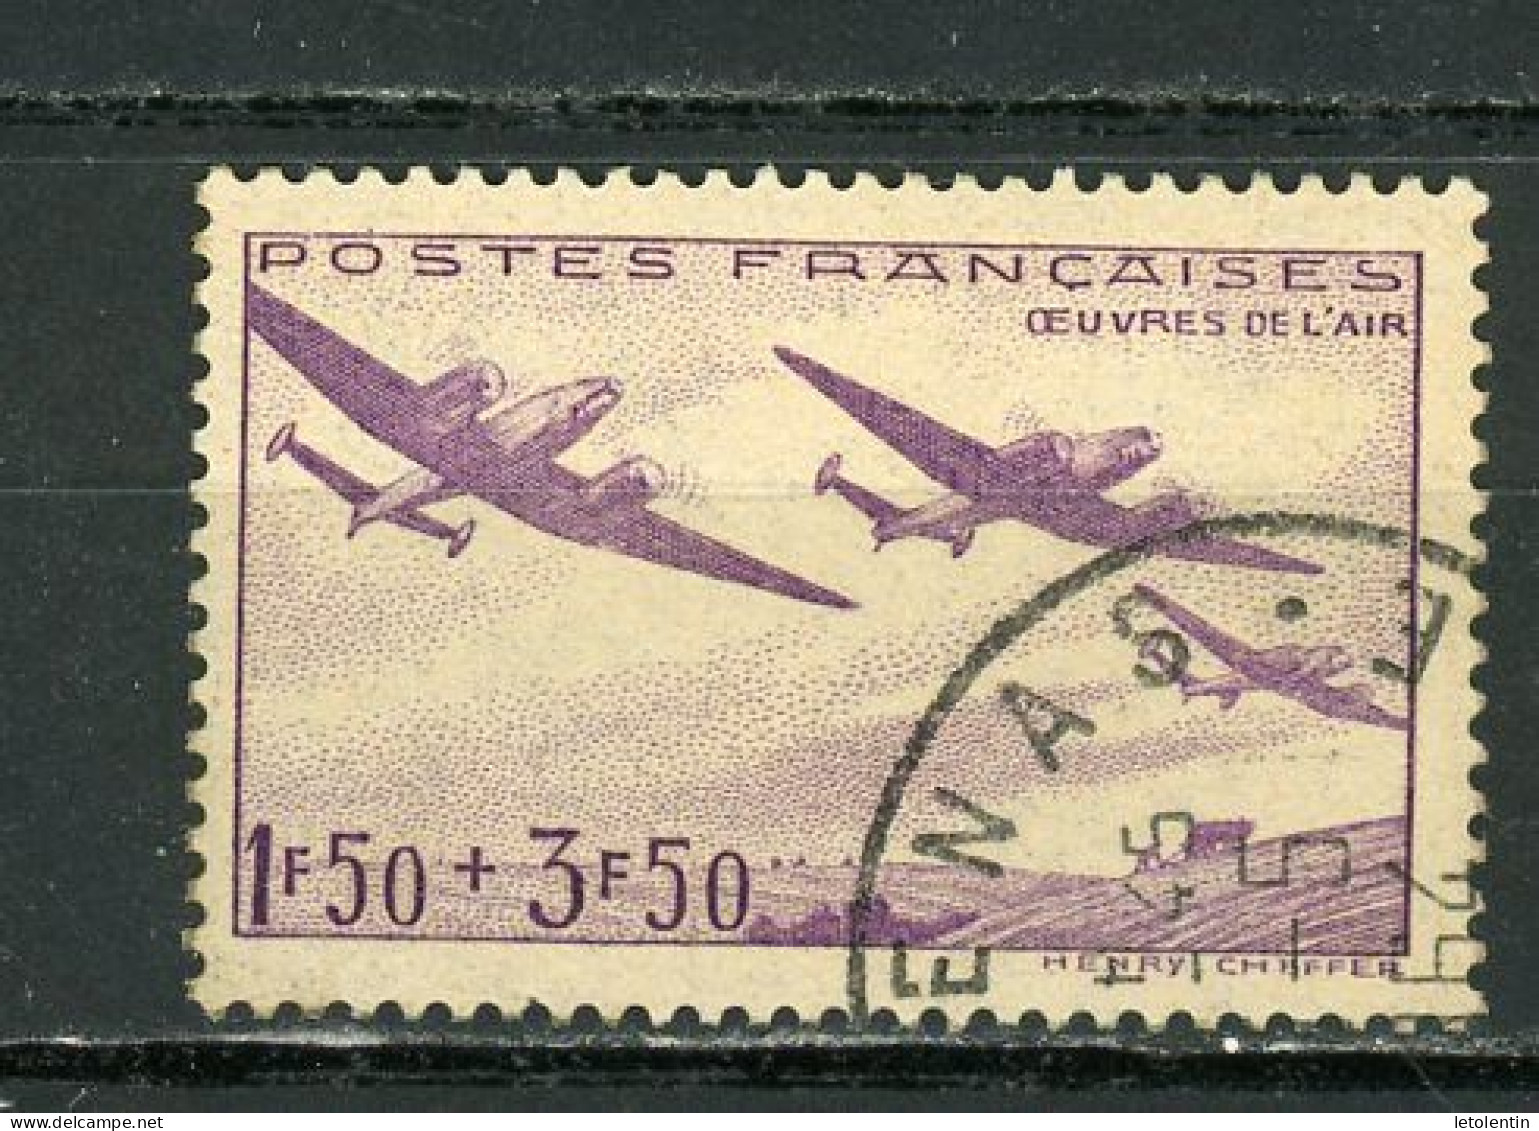 FRANCE - OEUVRES DE L'AIR - N° Yvert 540 Obli. - Used Stamps